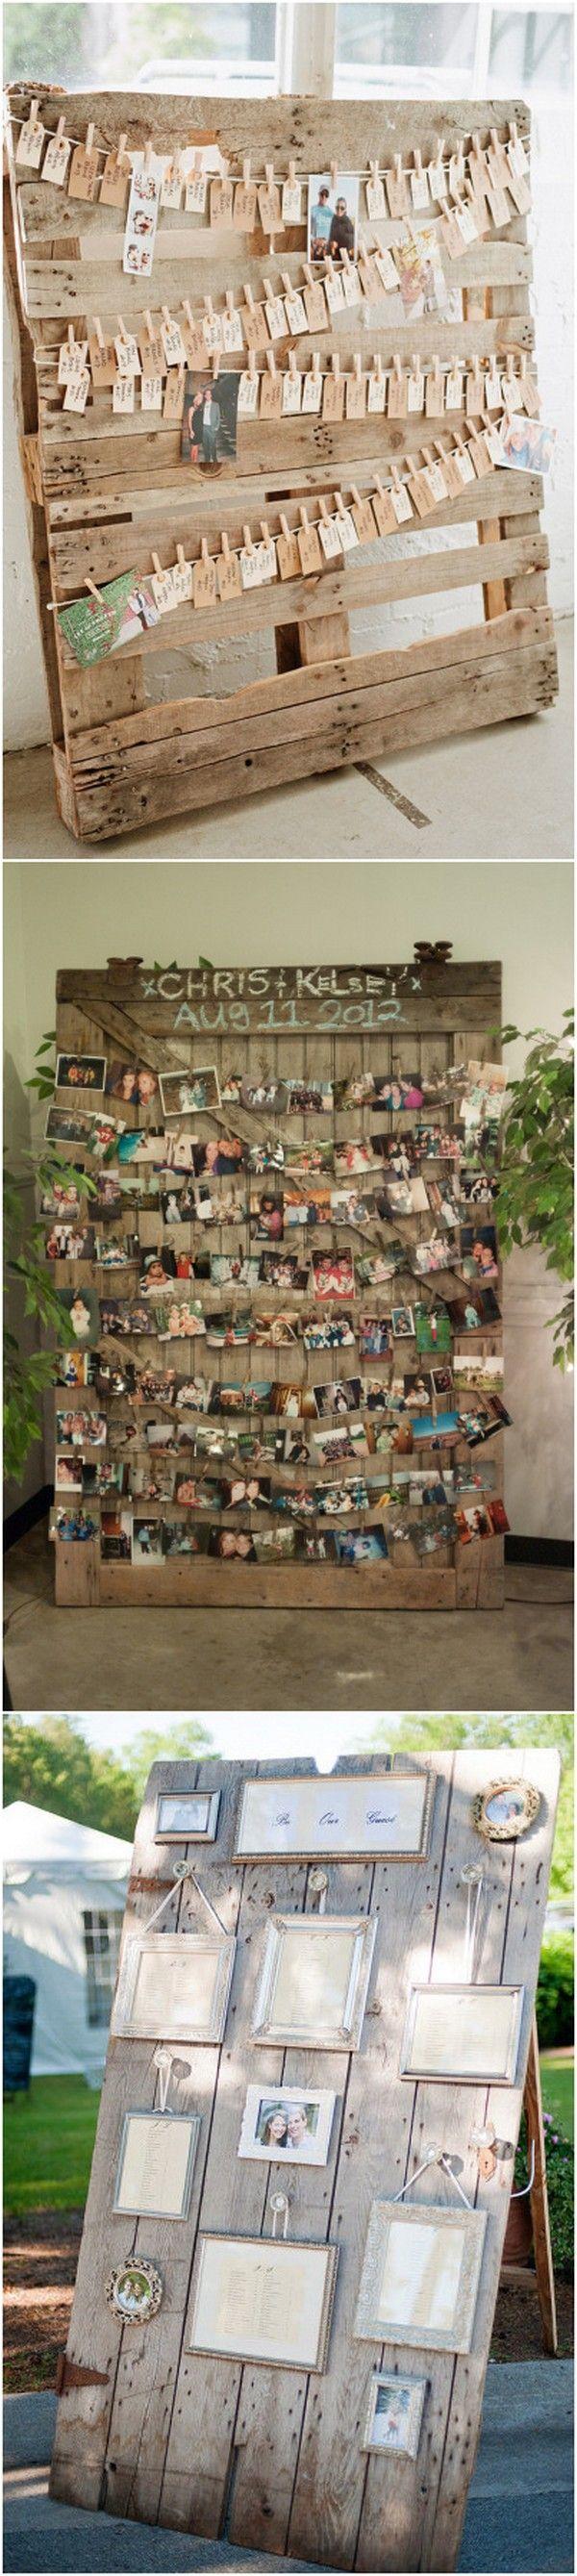 Wedding - 24 Ideas To Use Wood Pallet For Your Country Wedding